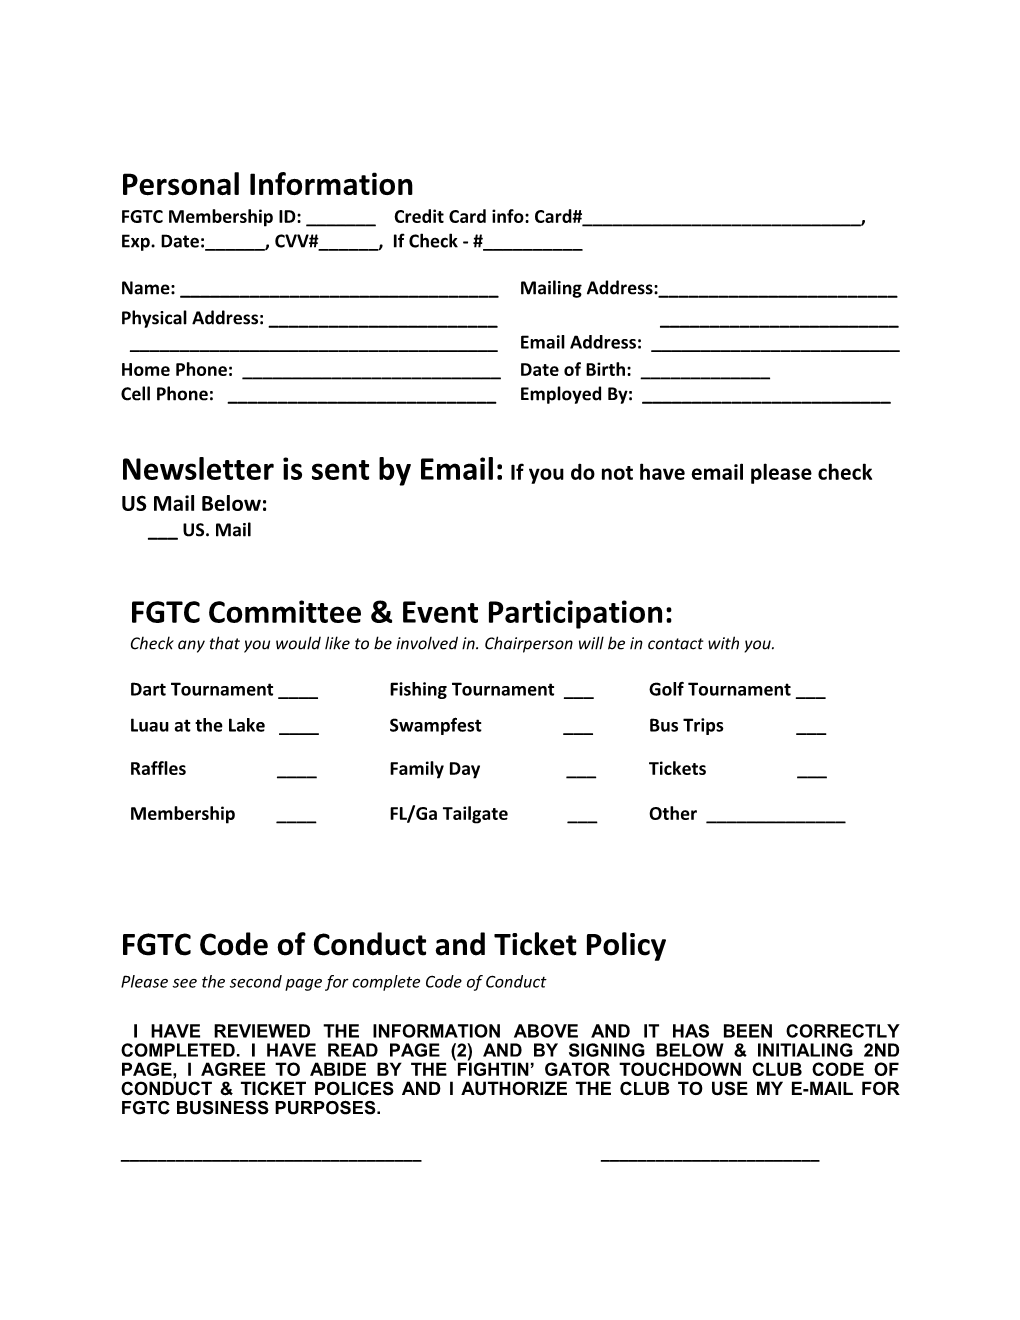 FGTC Code of Conduct and Ticket Policy